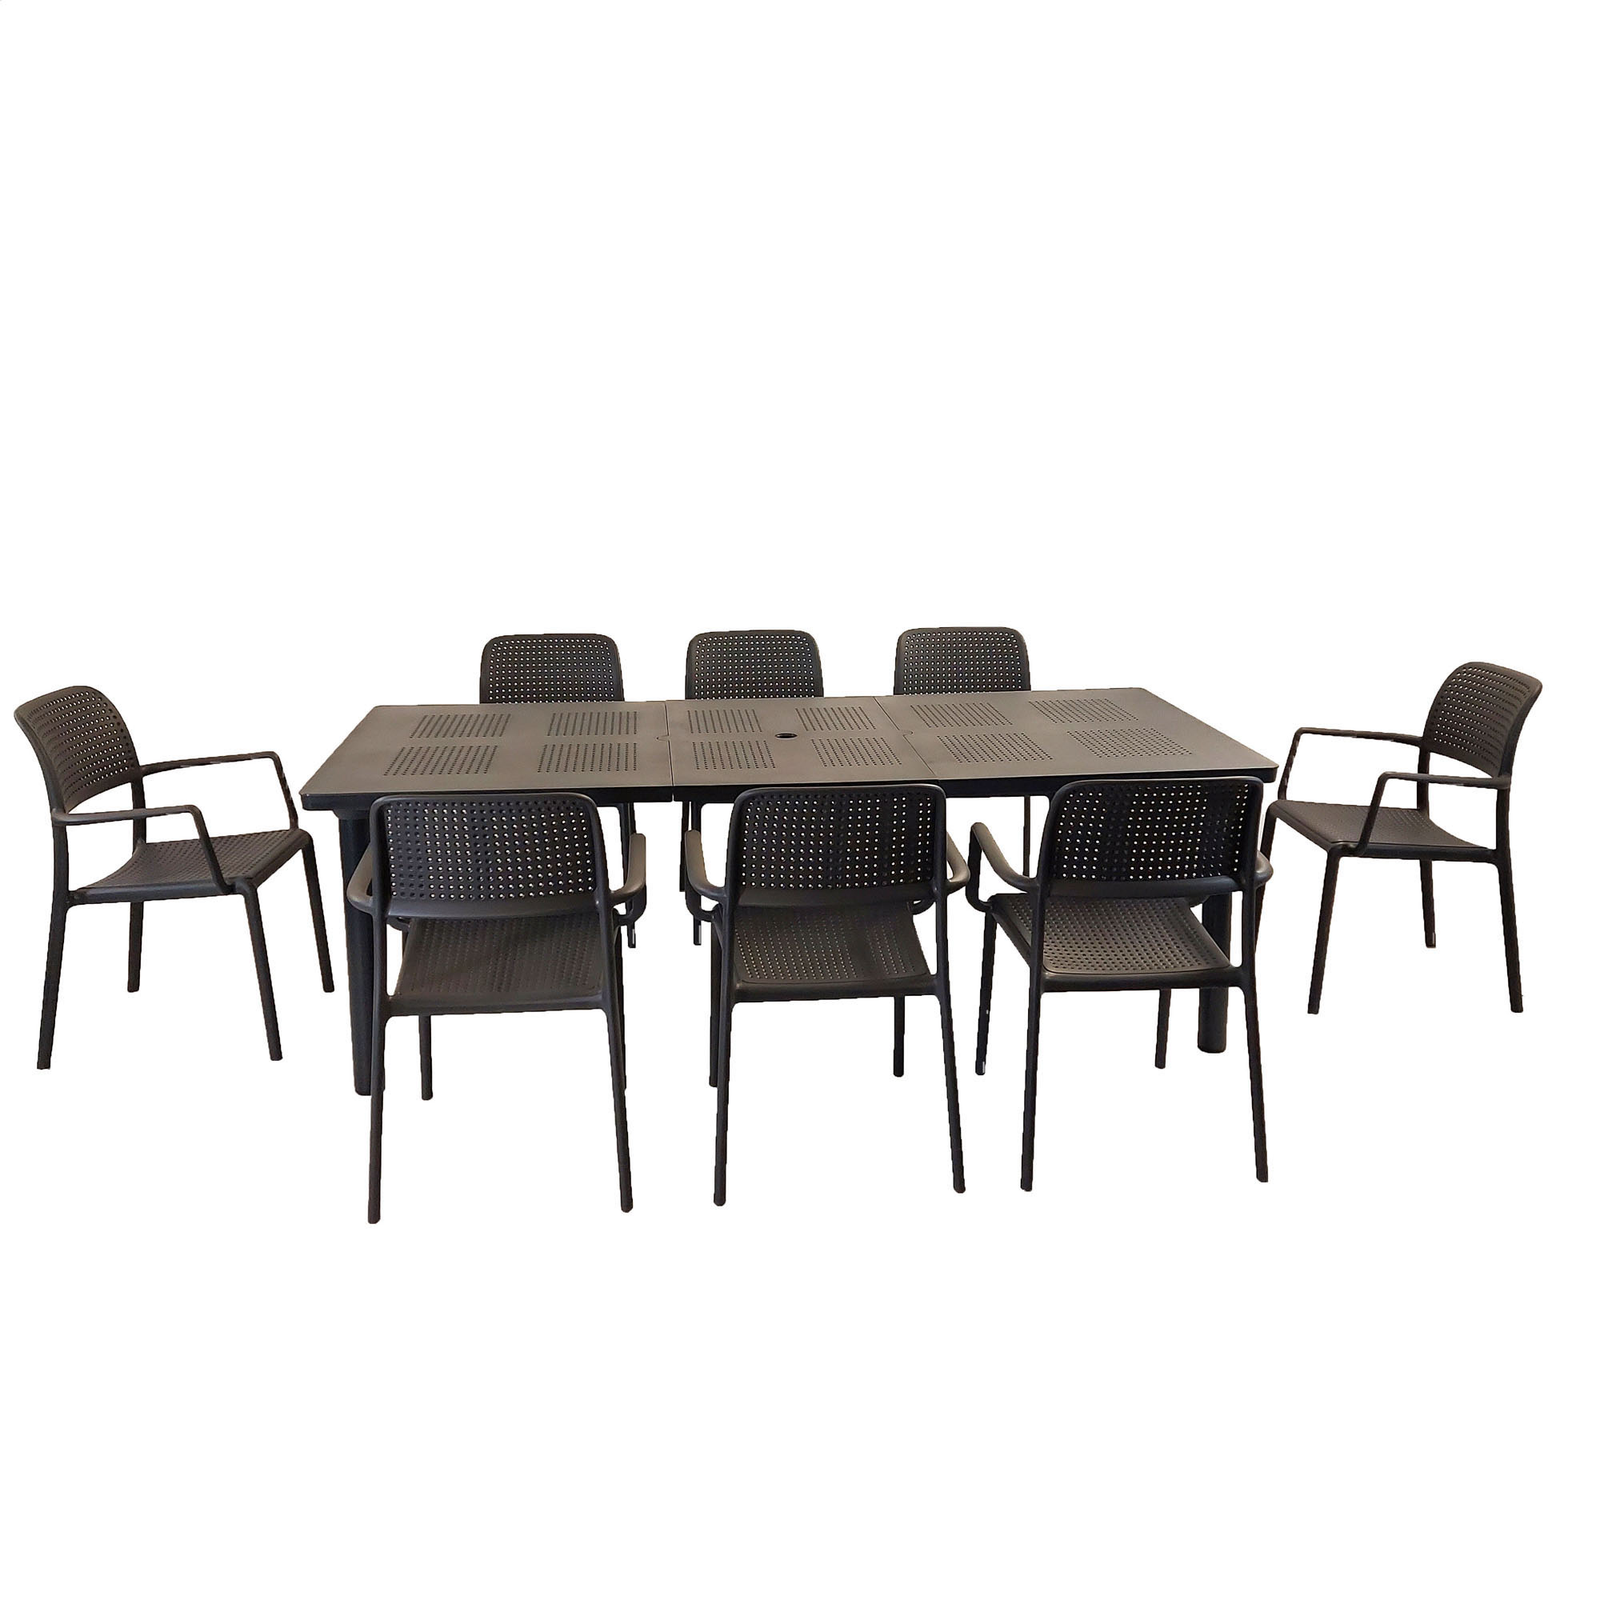 Nardi Libeccio Extending  Dining Table with 8 Bora Chairs in Anthracite Garden Dining Set Dining Sets Nardi   